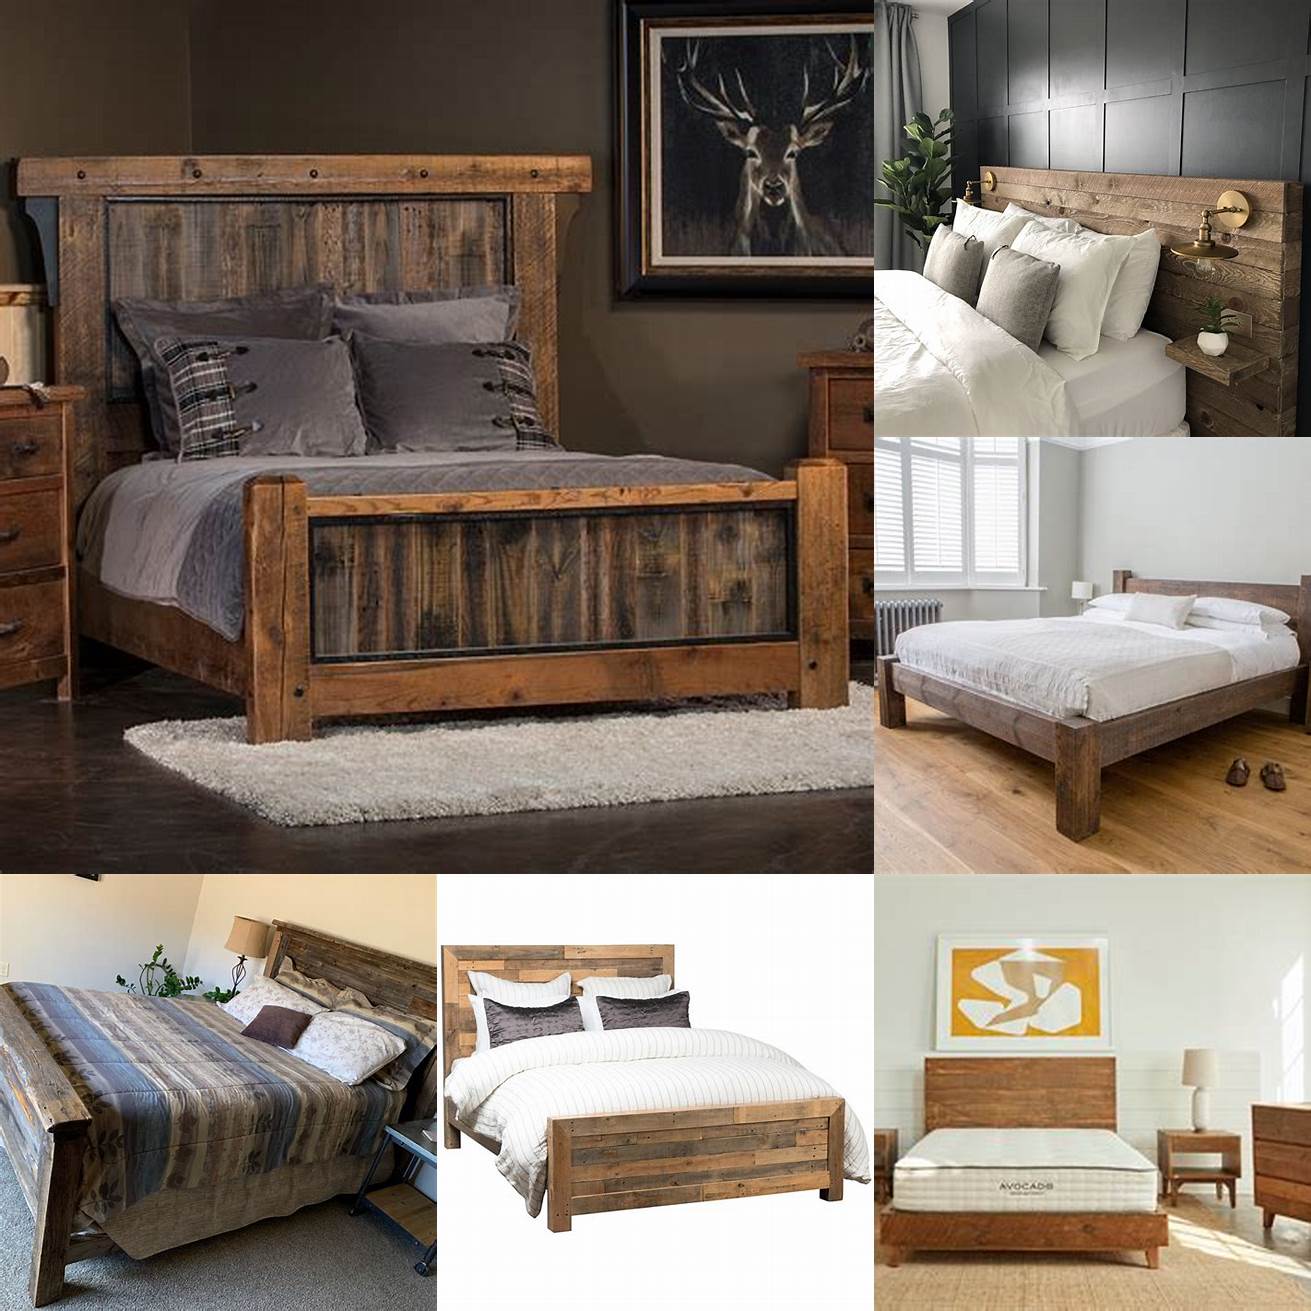 Image of a reclaimed wood bed frame with a neutral-colored bedding